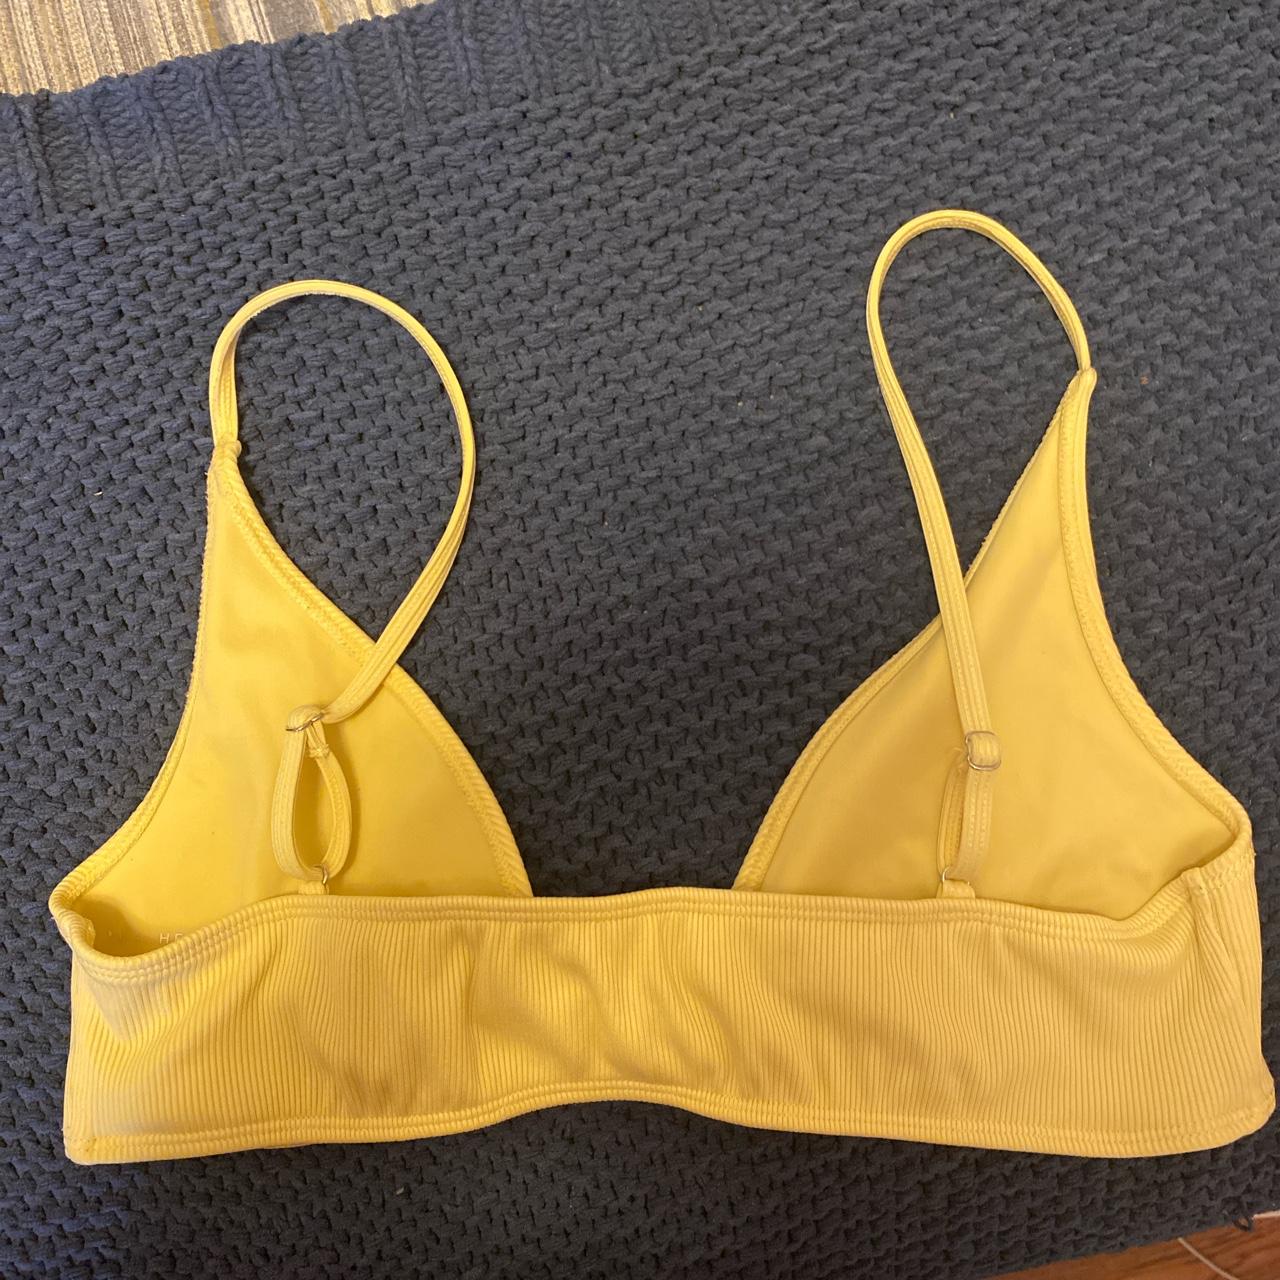 Product Image 2 - Pastel yellow swimming top 
size: